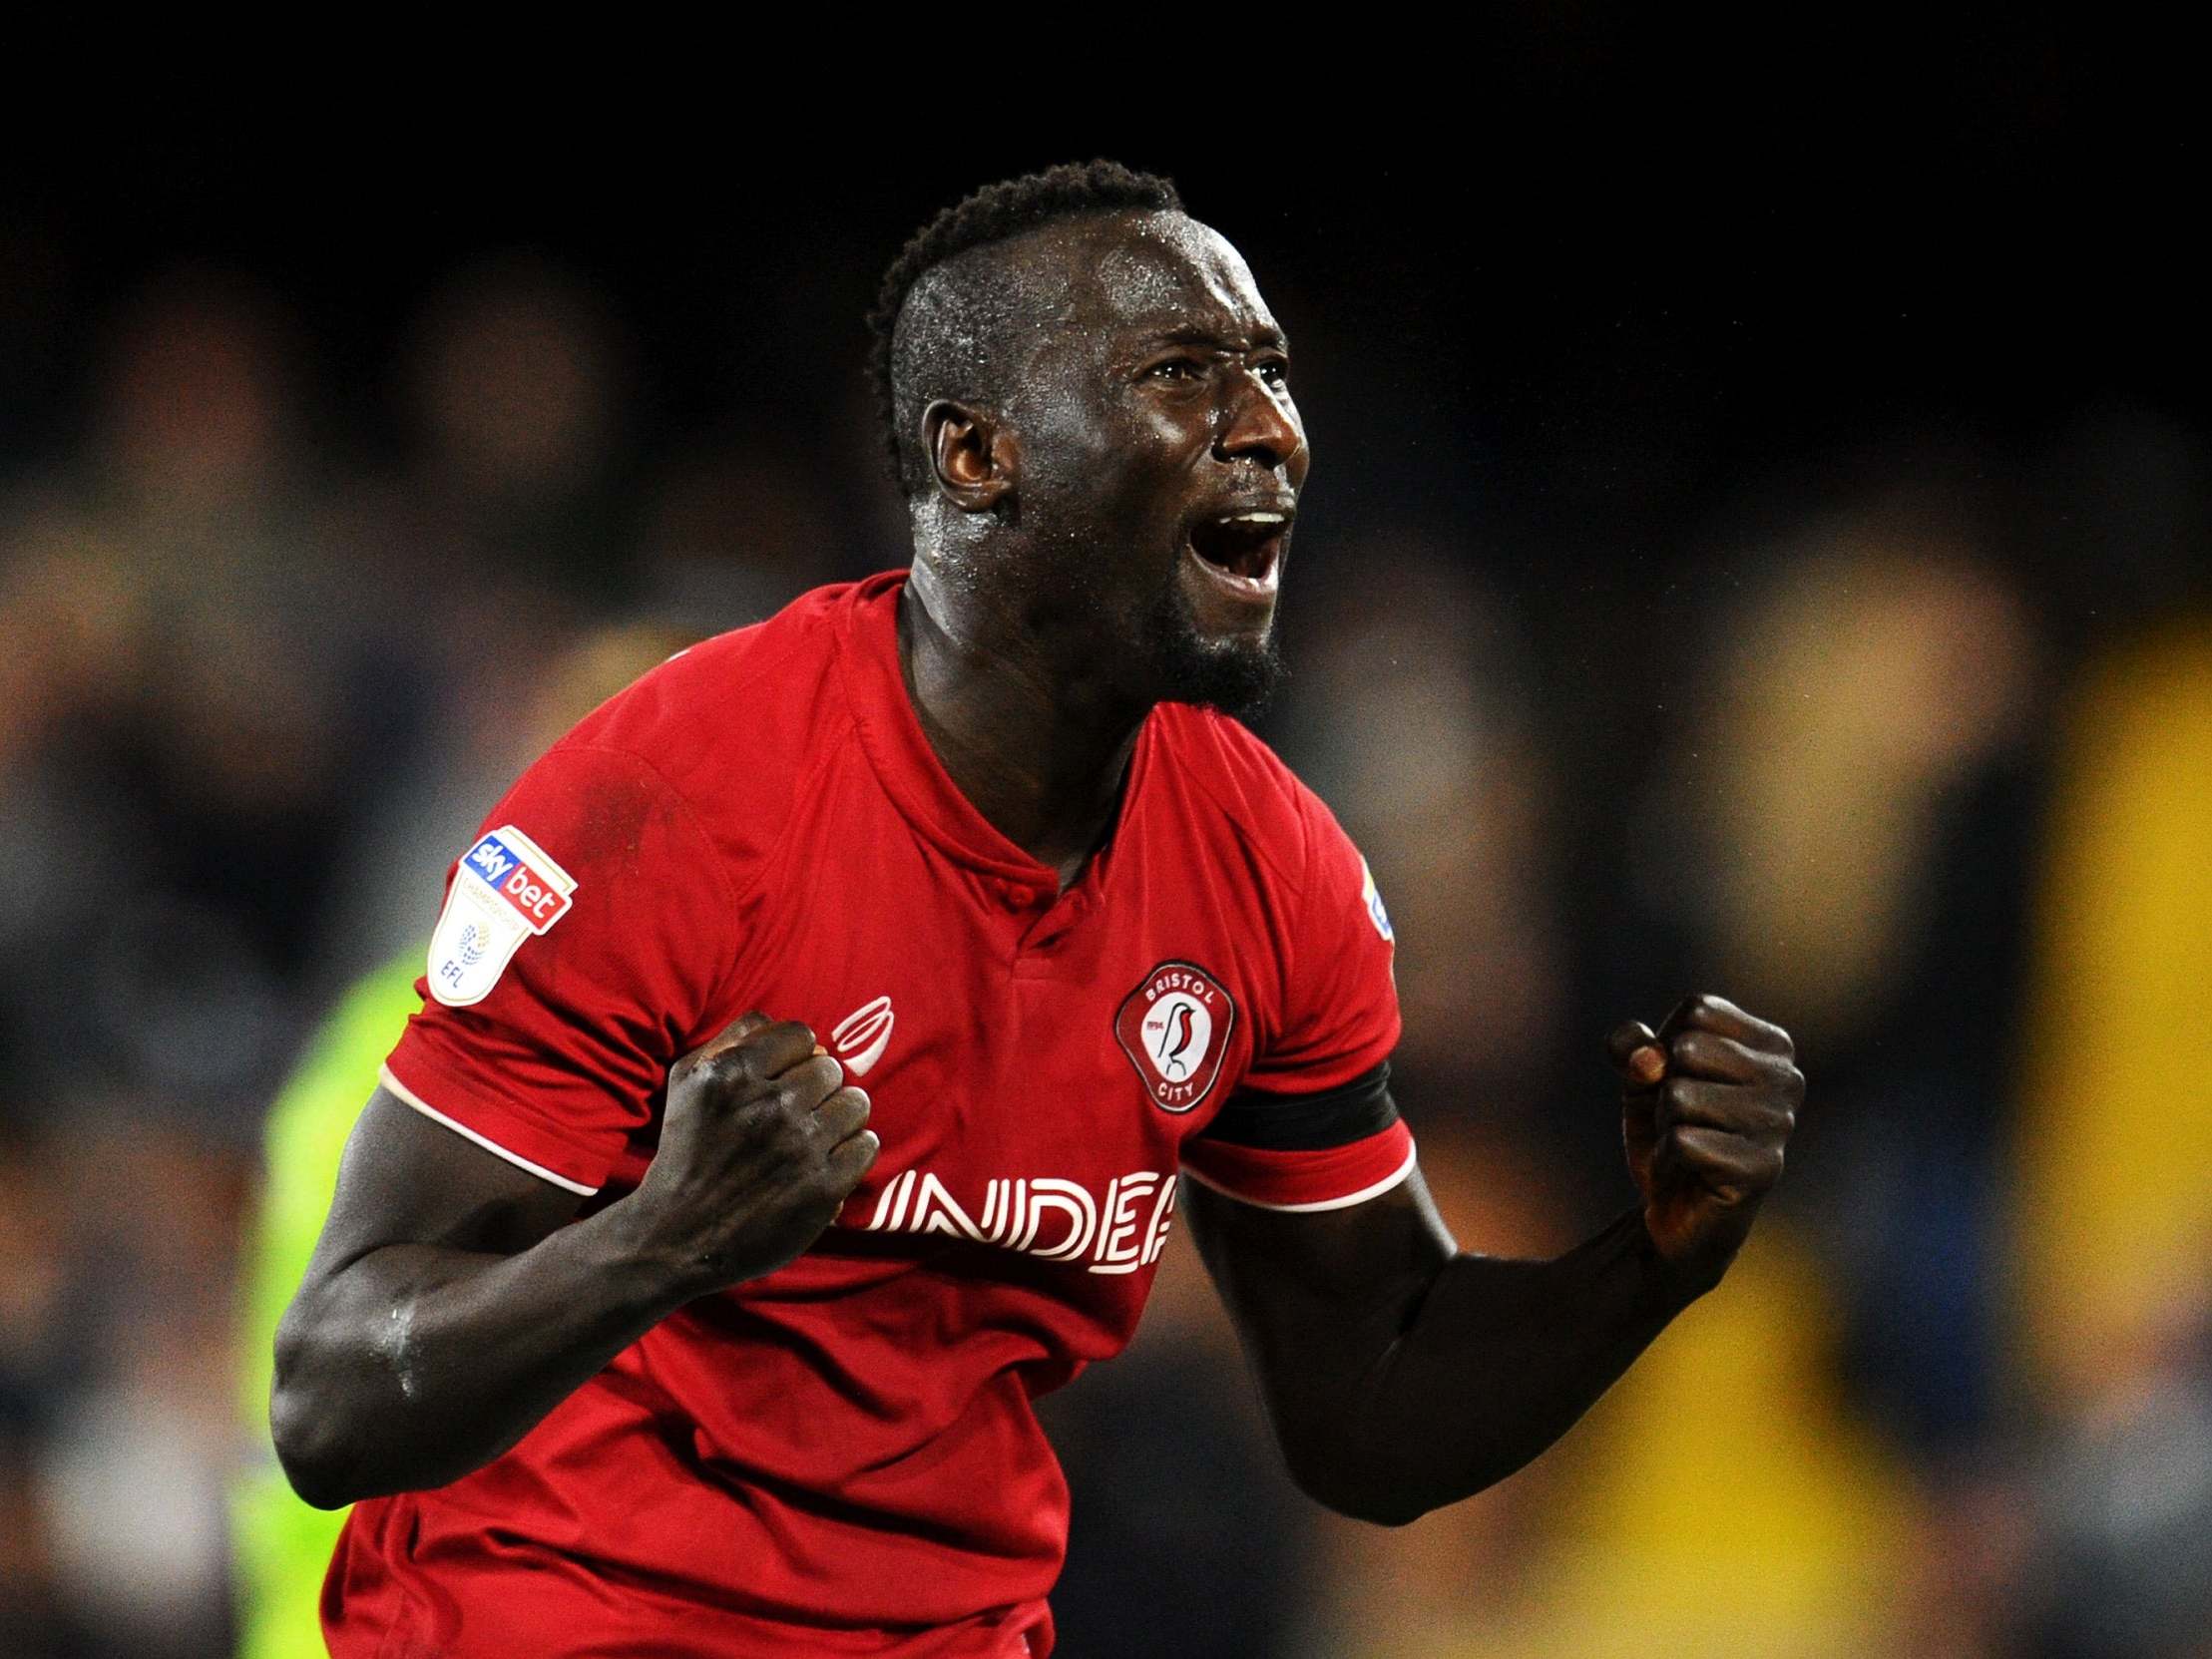 Bristol City striker Famara Diedhiou subjected to racist abuse on social media after missing penalty thumbnail